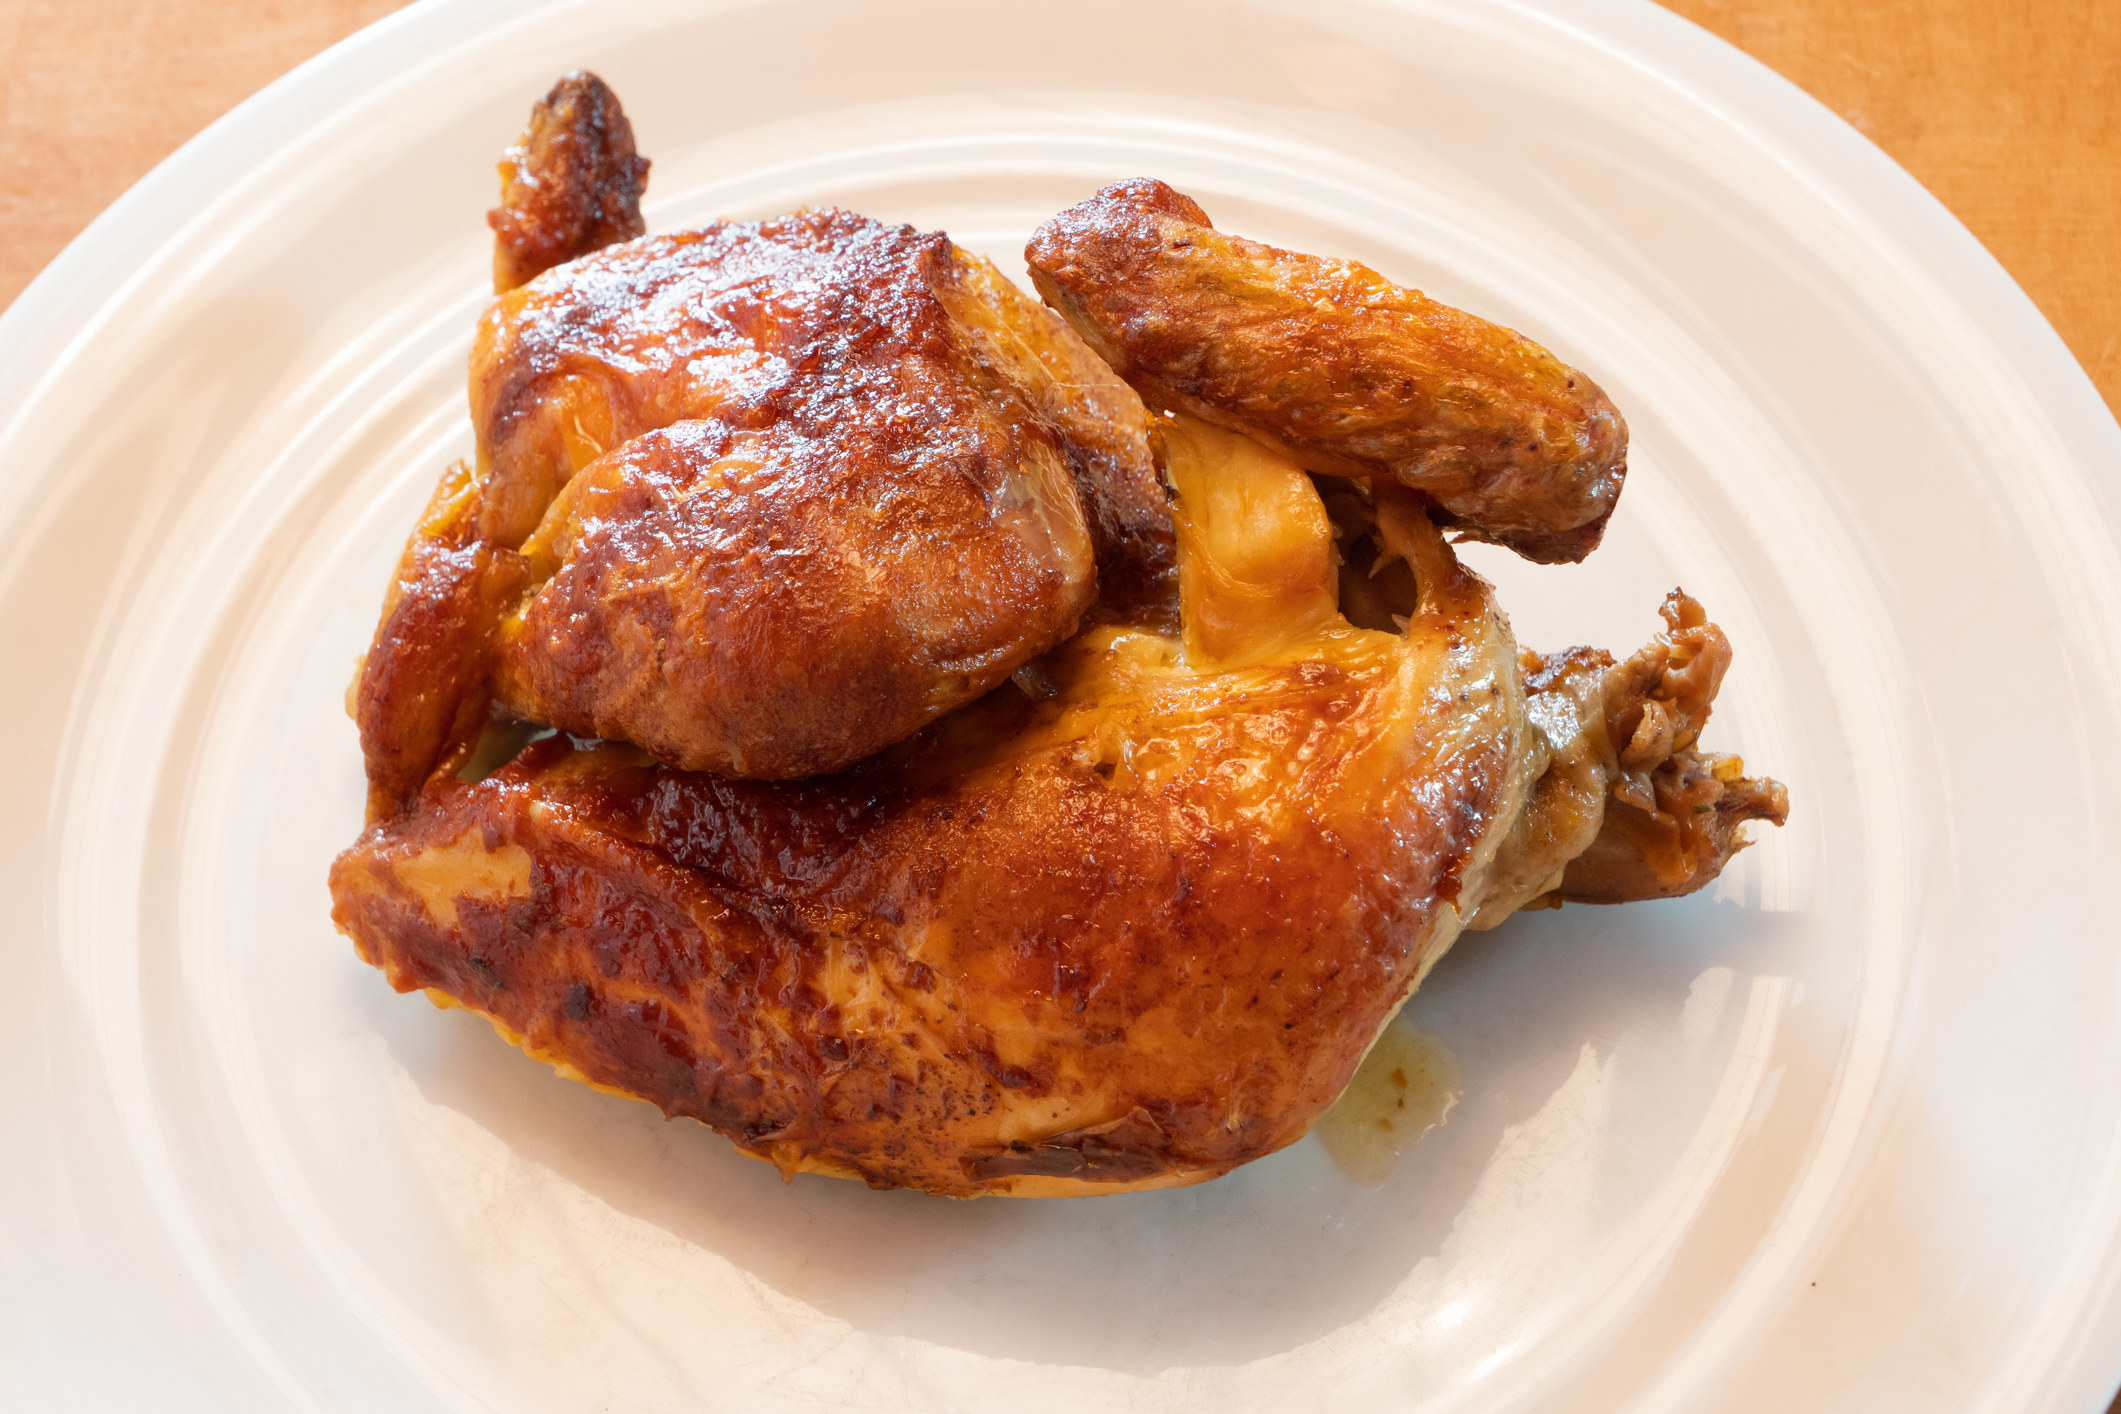 A rotisserie chicken on a plate.